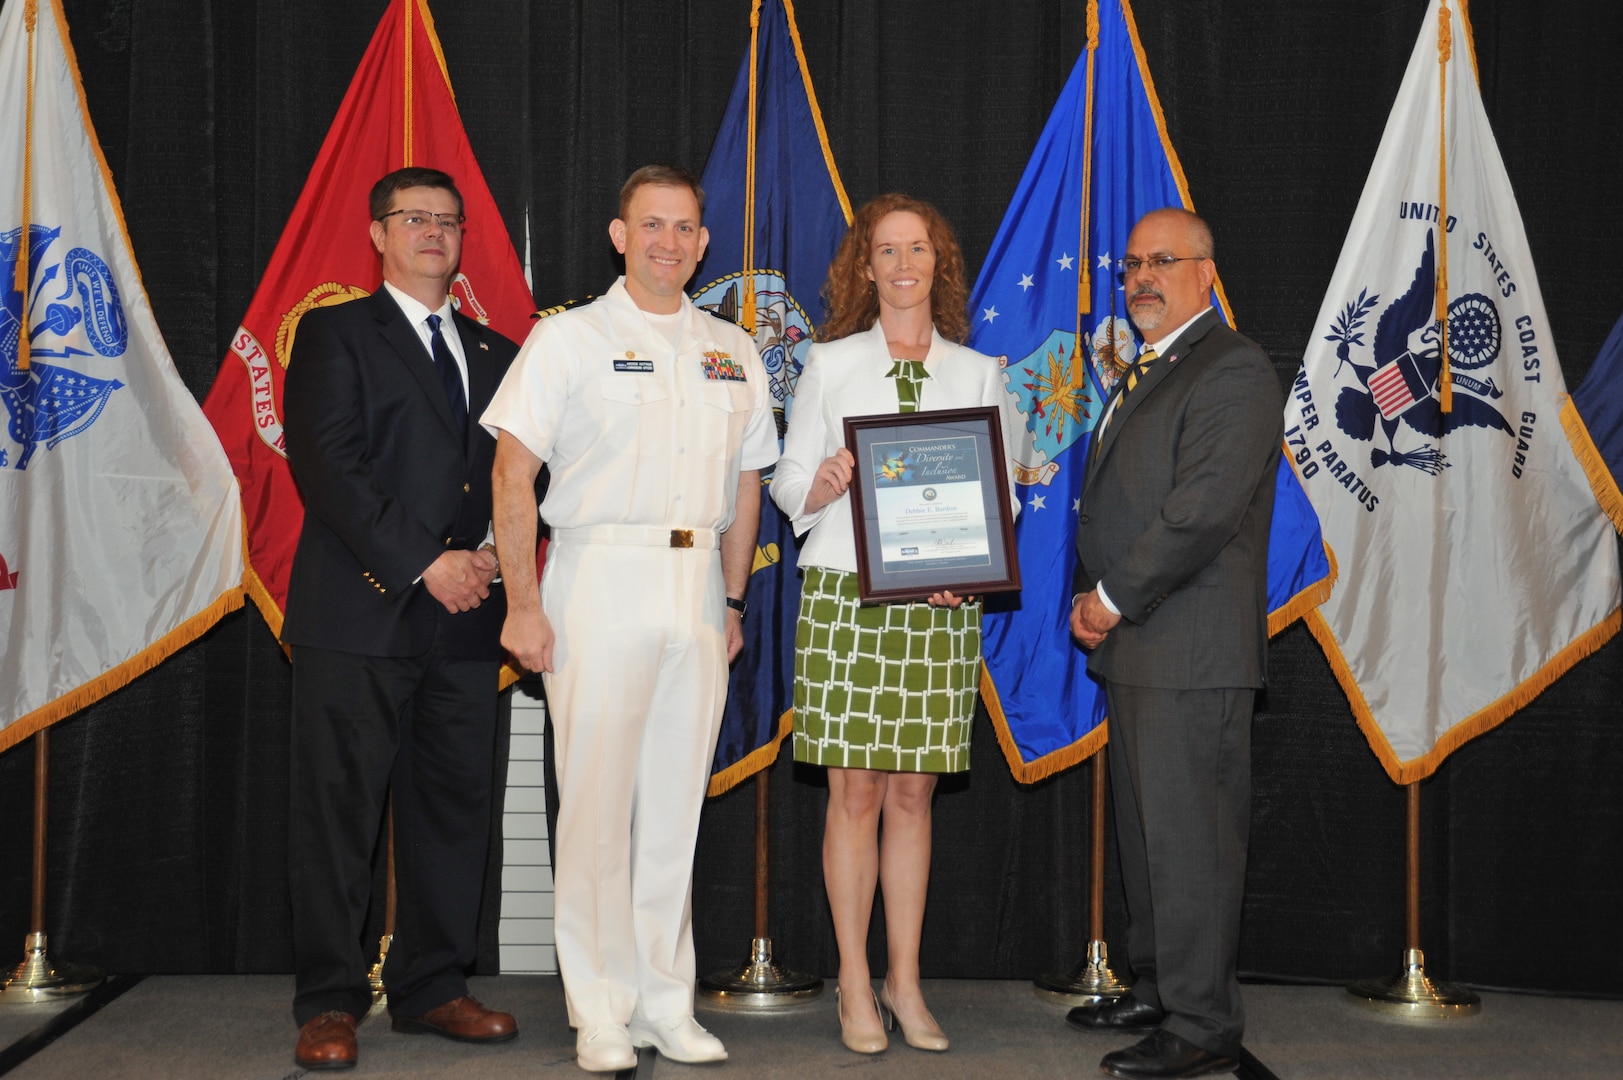 IMAGE: Debbie Bardine is presented the Commander's Diversity and Inclusion Award at Naval Surface Warfare Center Dahlgren Division's annual awards ceremony, Apr. 26 at the Fredericksburg Expo and Conference Center.